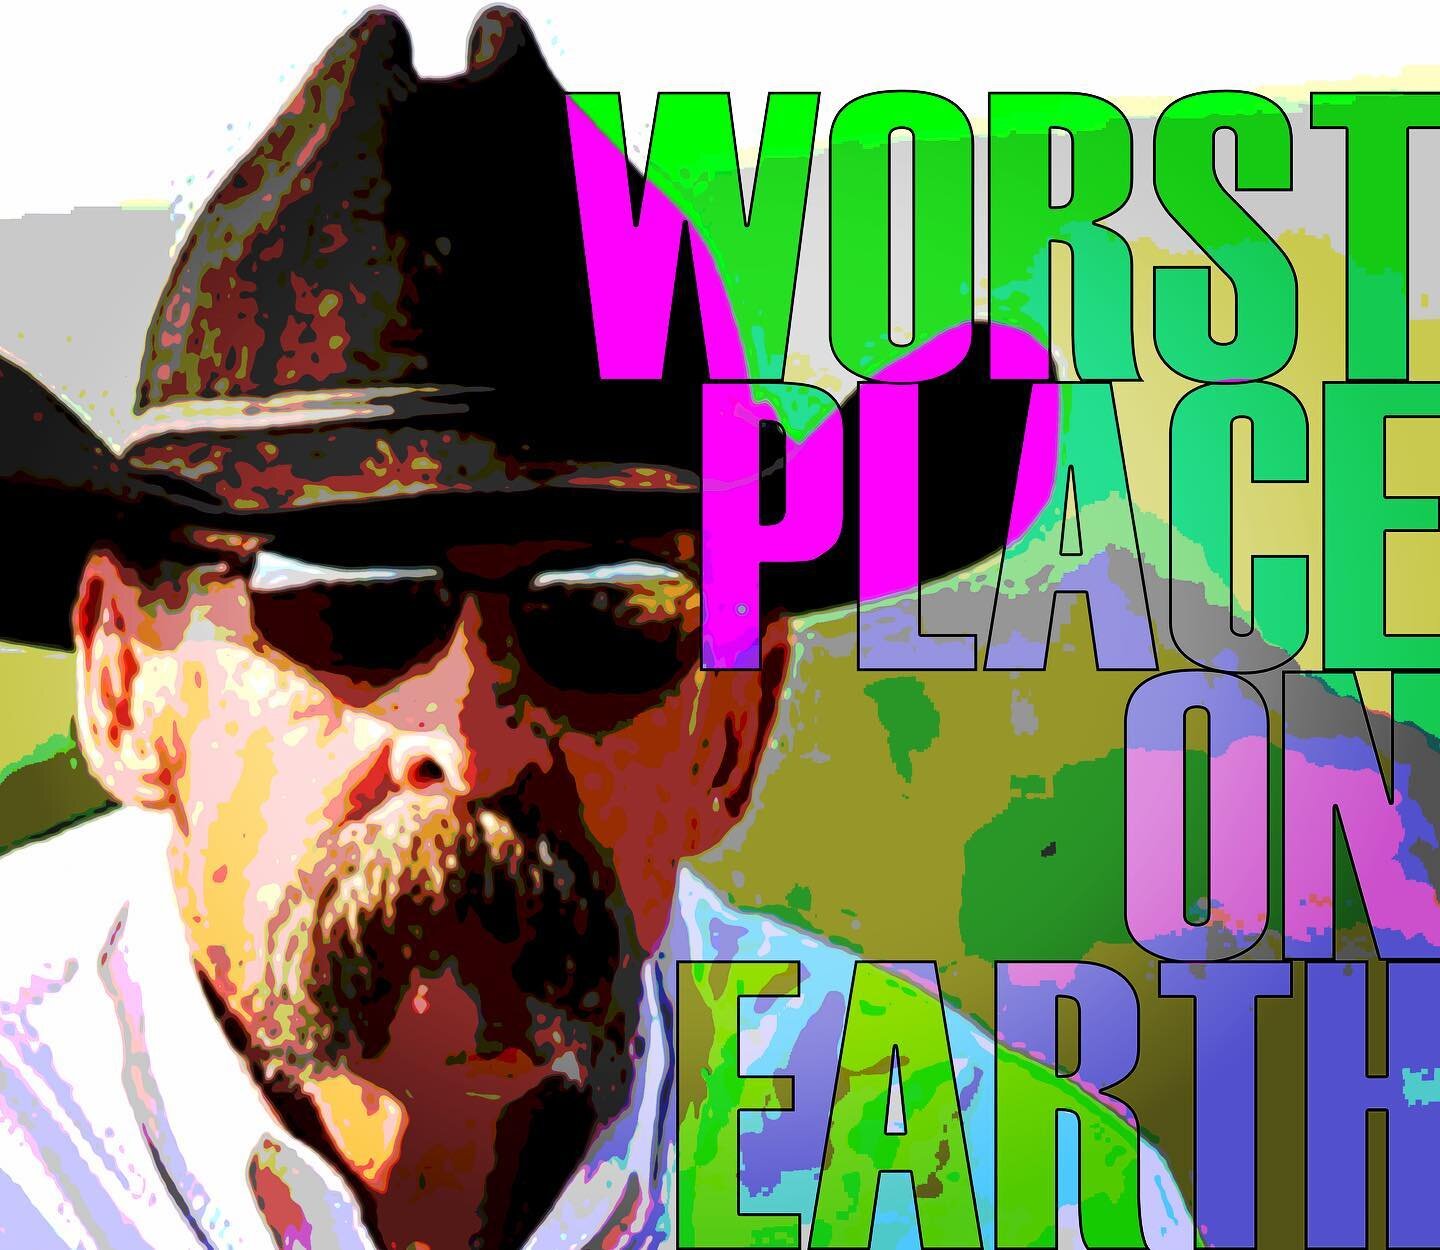 Our Season Finale of @worstplaceonearthpodcast is out now! Take a listen to Episode 20, and find out where all the cowboys have gone!
www.anchor.fm/wpoe 
@jotalejos @lauderdog #floridaman #onlyinflorida #lifeinthetimeofcorona